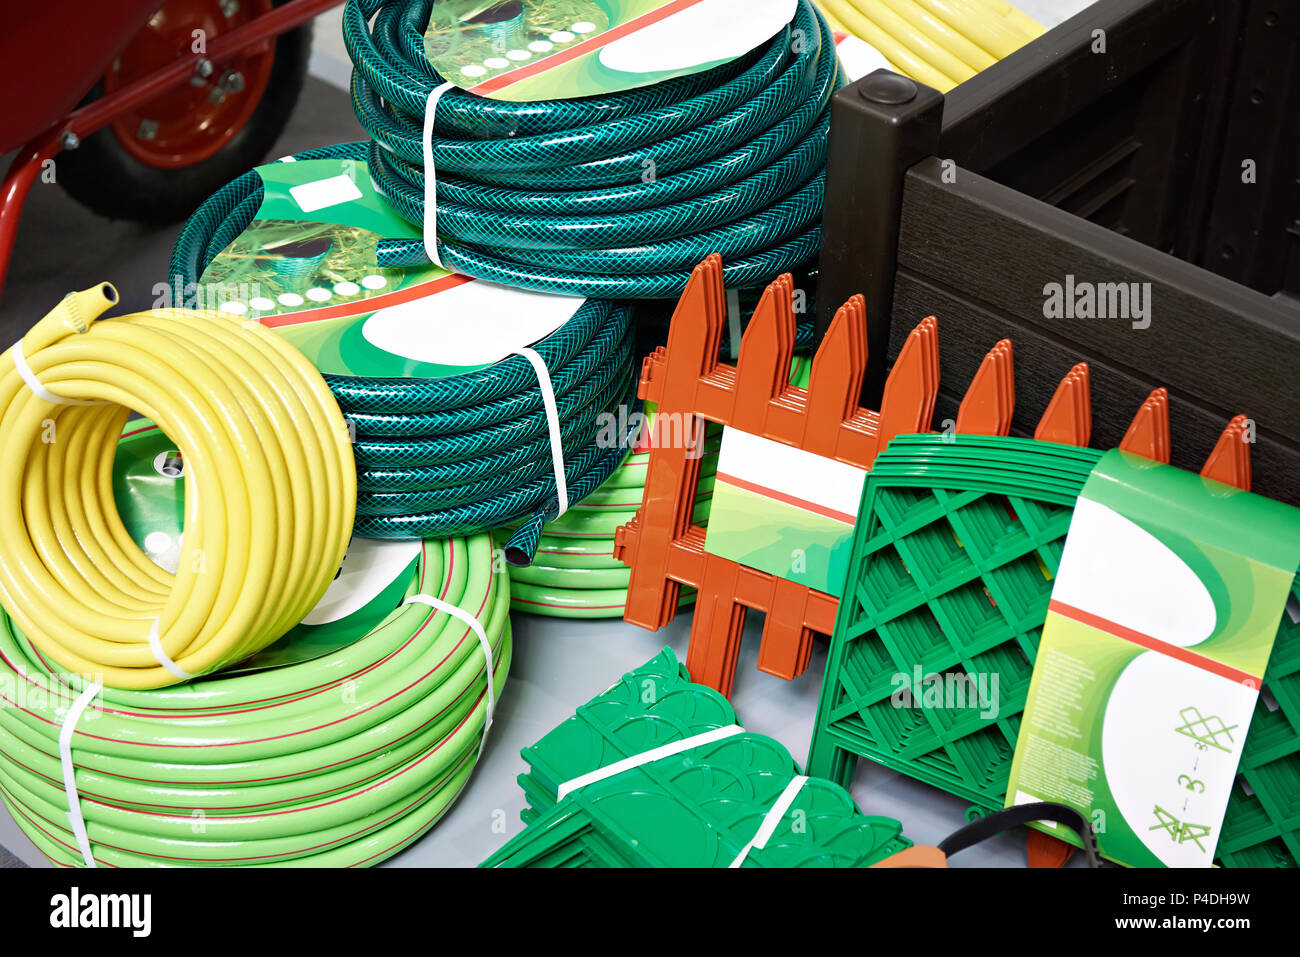 Garden hoses and a fence in a household goods store Stock Photo